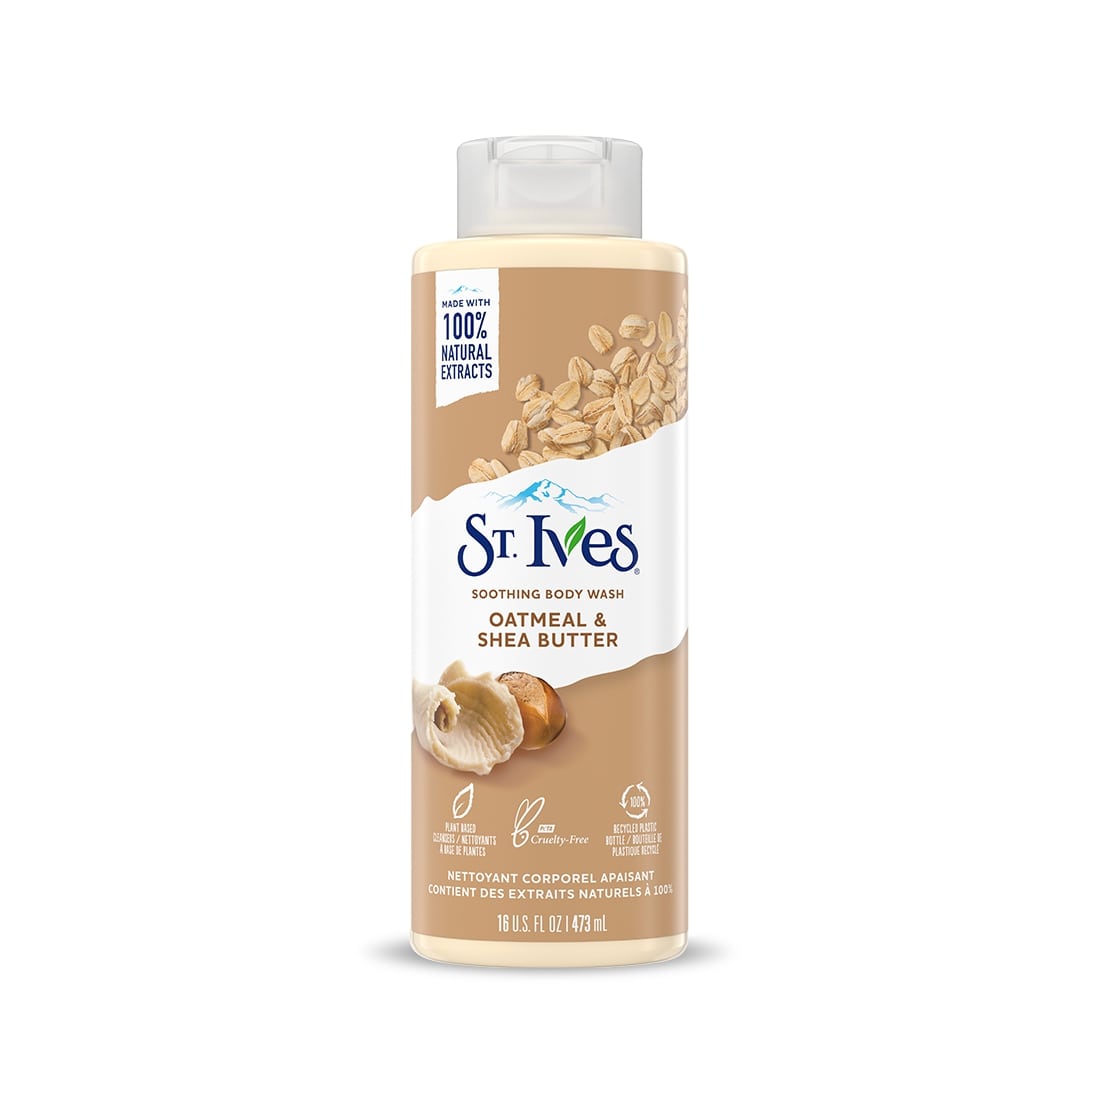 St. Ives Soothing Oeatmeal & Shea Butter Flavour Body Wash, 473 ml, Pack of 1 